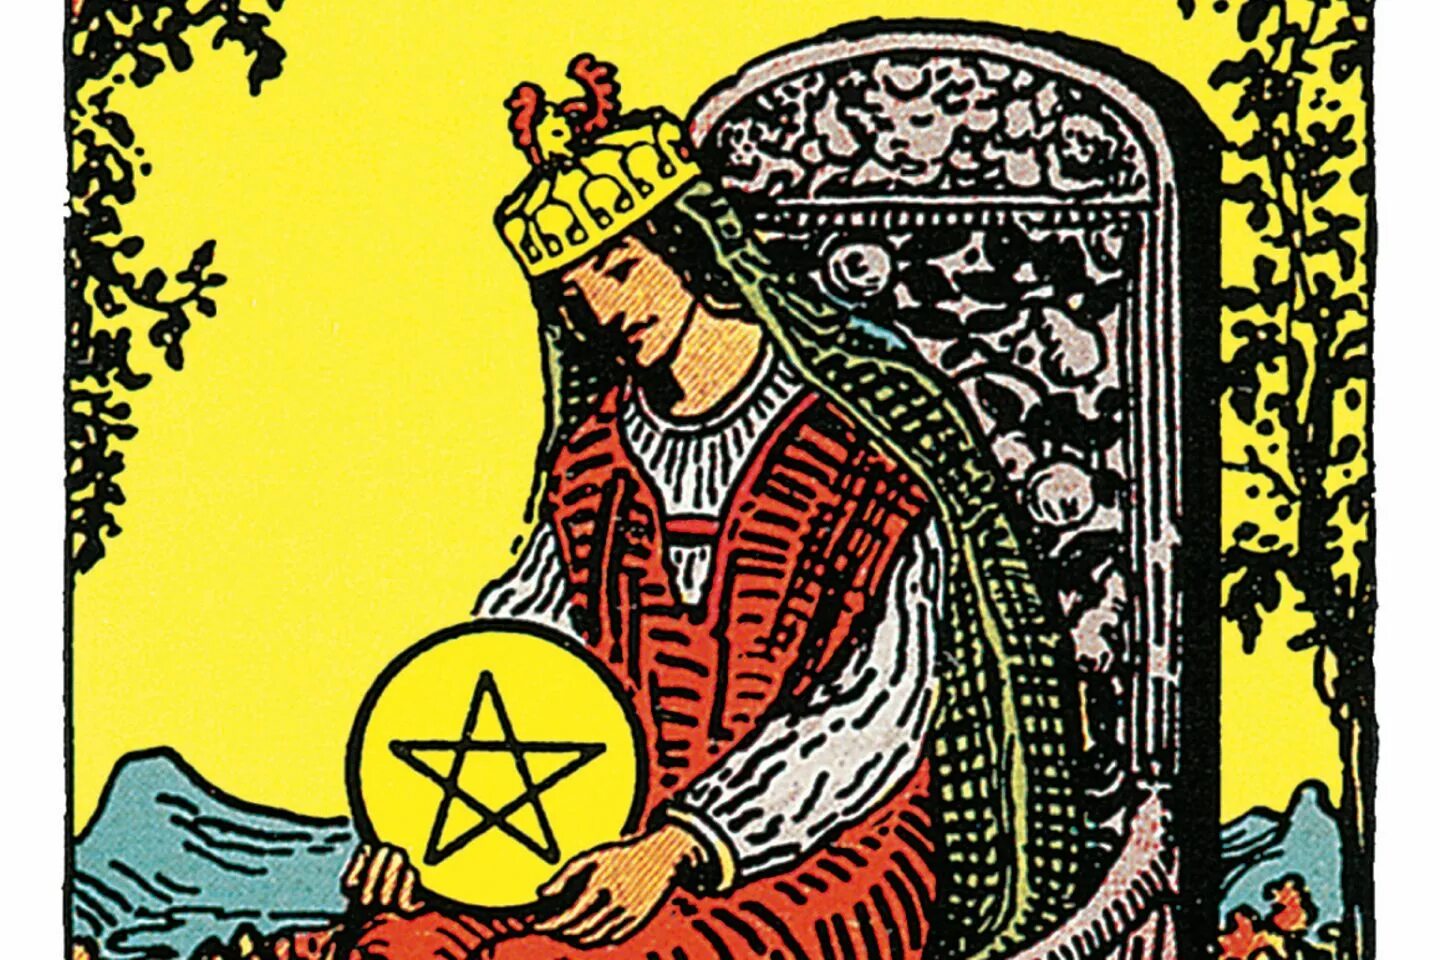 Queen of Pentacles Таро. Королева пентаклей Таро Уэйта. Карта Таро Королева пентаклей. Король пентаклей Уэйт. Королева пентаклей на мужчину